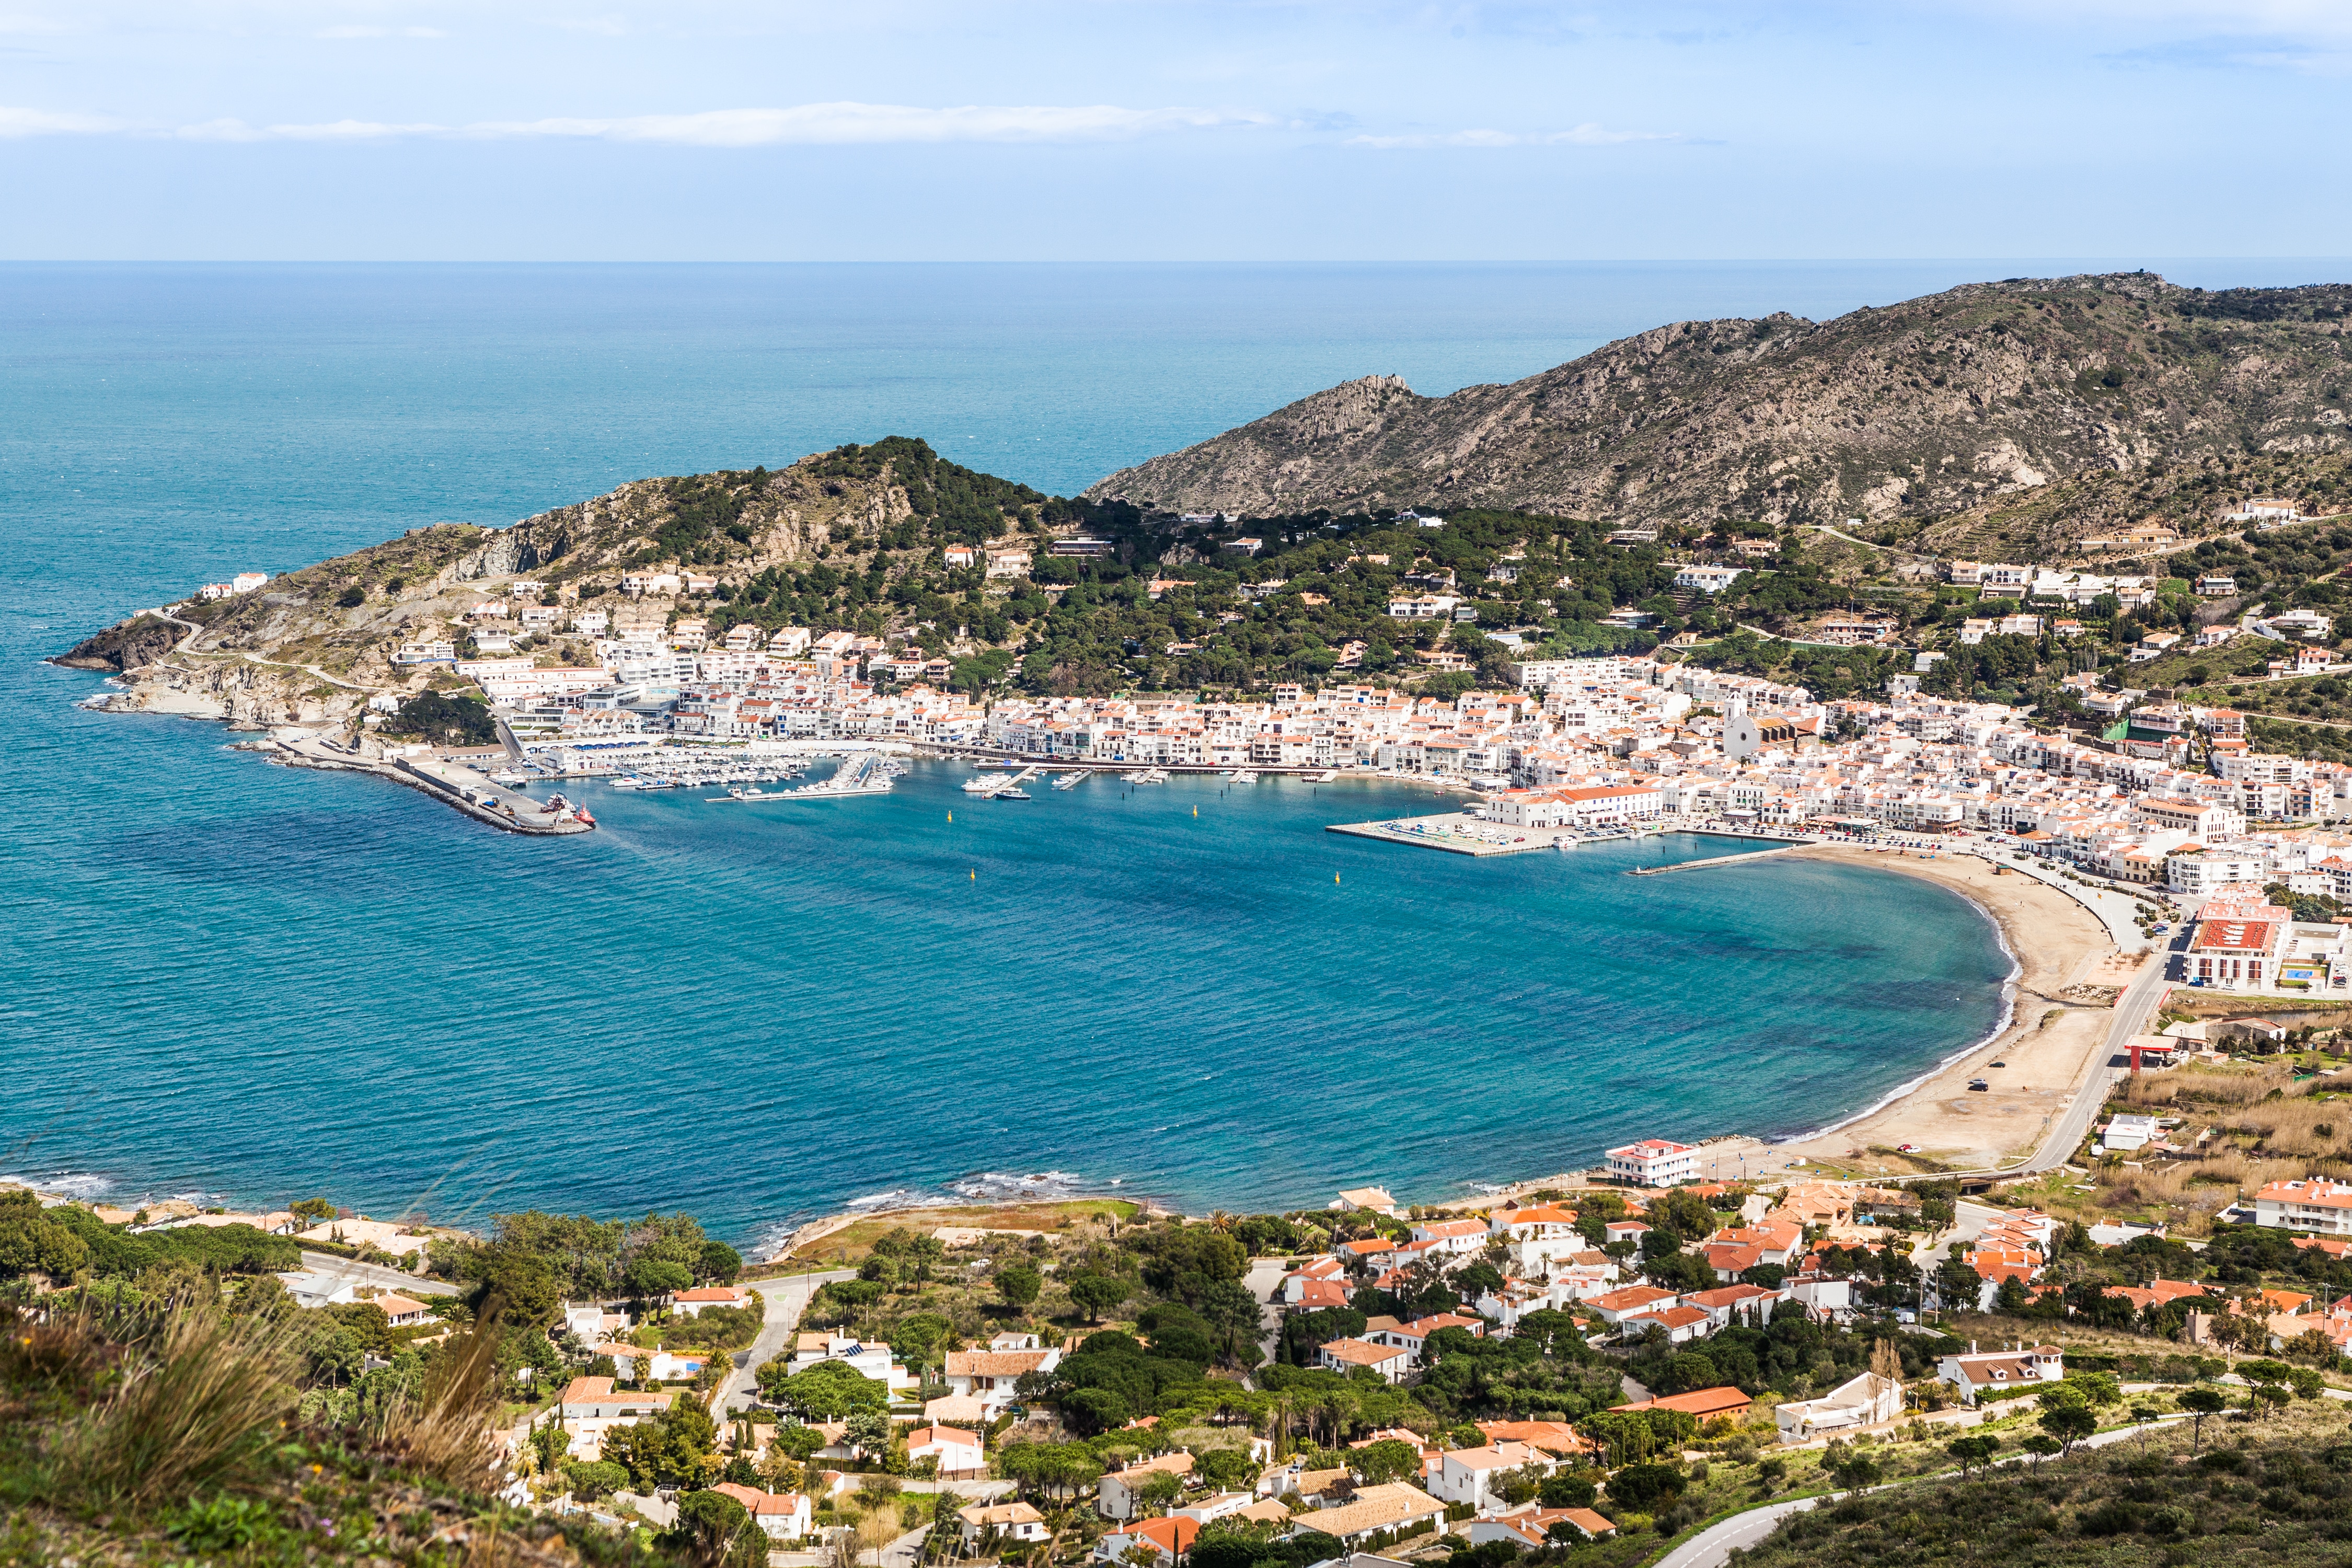 How ERT and Seequent helped bring healthier water to a Spanish seaside town